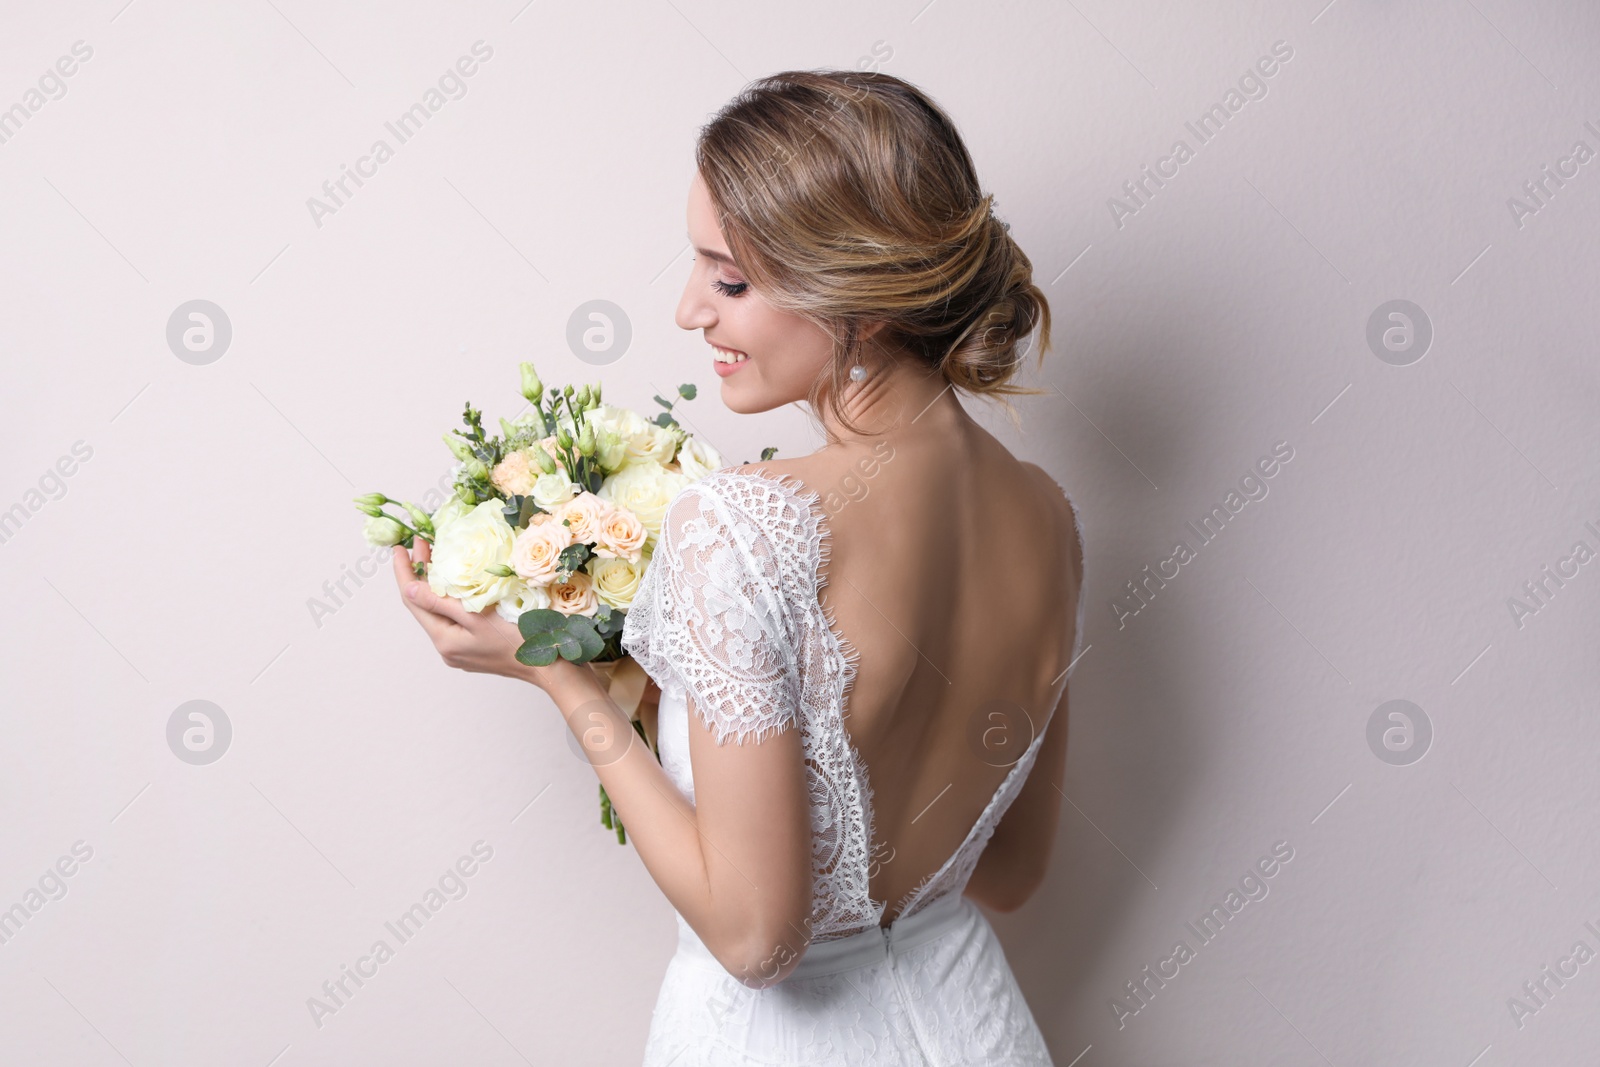 Photo of Young bride with elegant hairstyle holding wedding bouquet on beige background